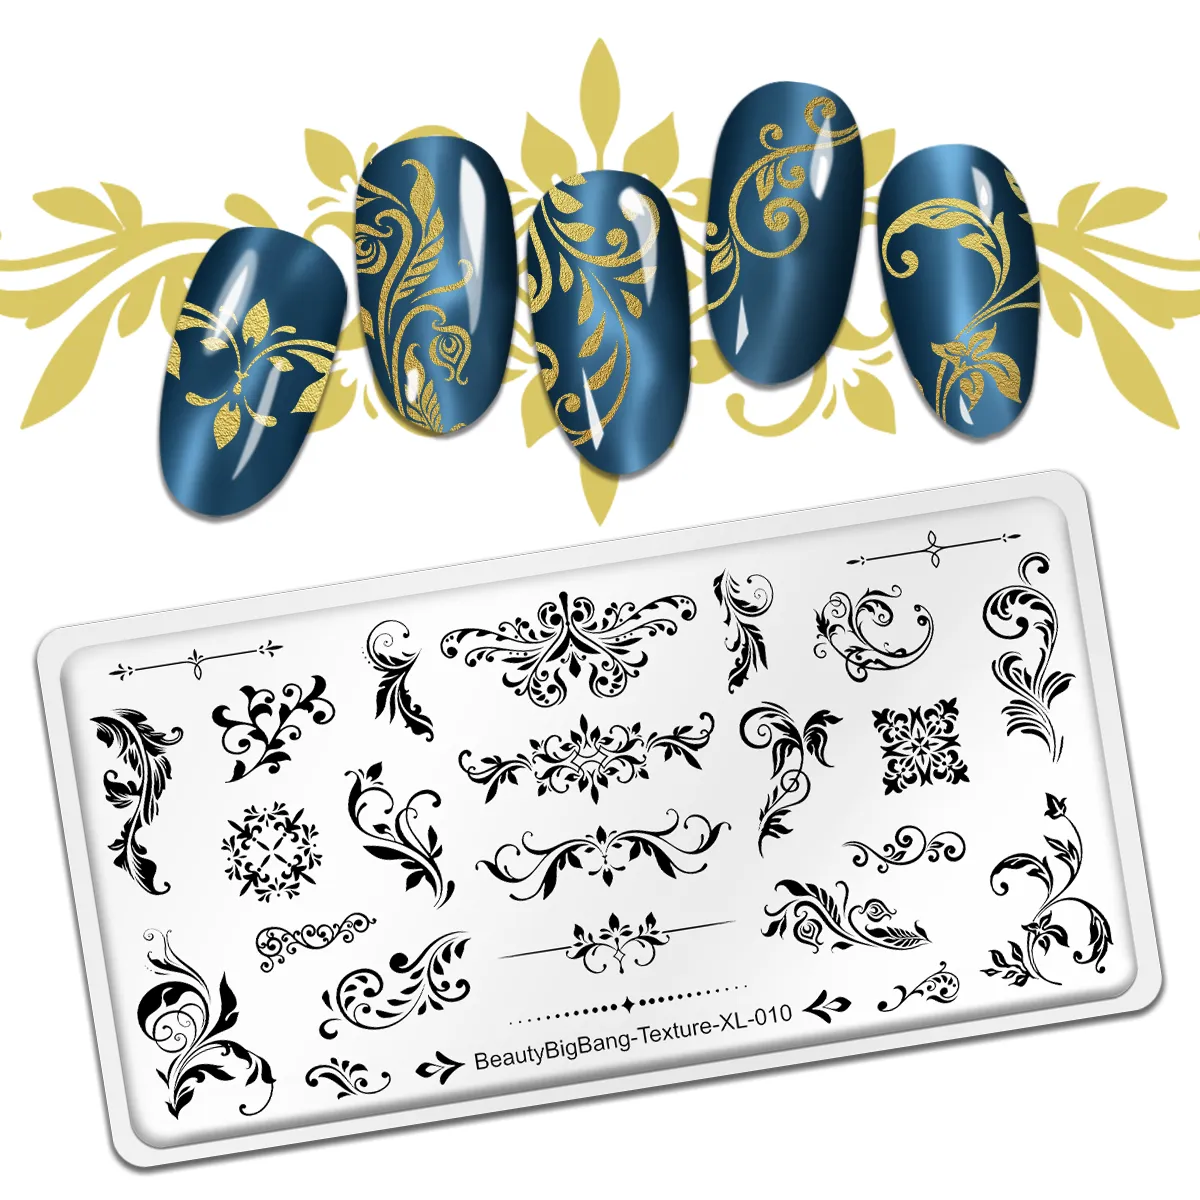 Nail Art Stamping Plate Template Vintage Floral Texture Design  -Texture-XL-010 